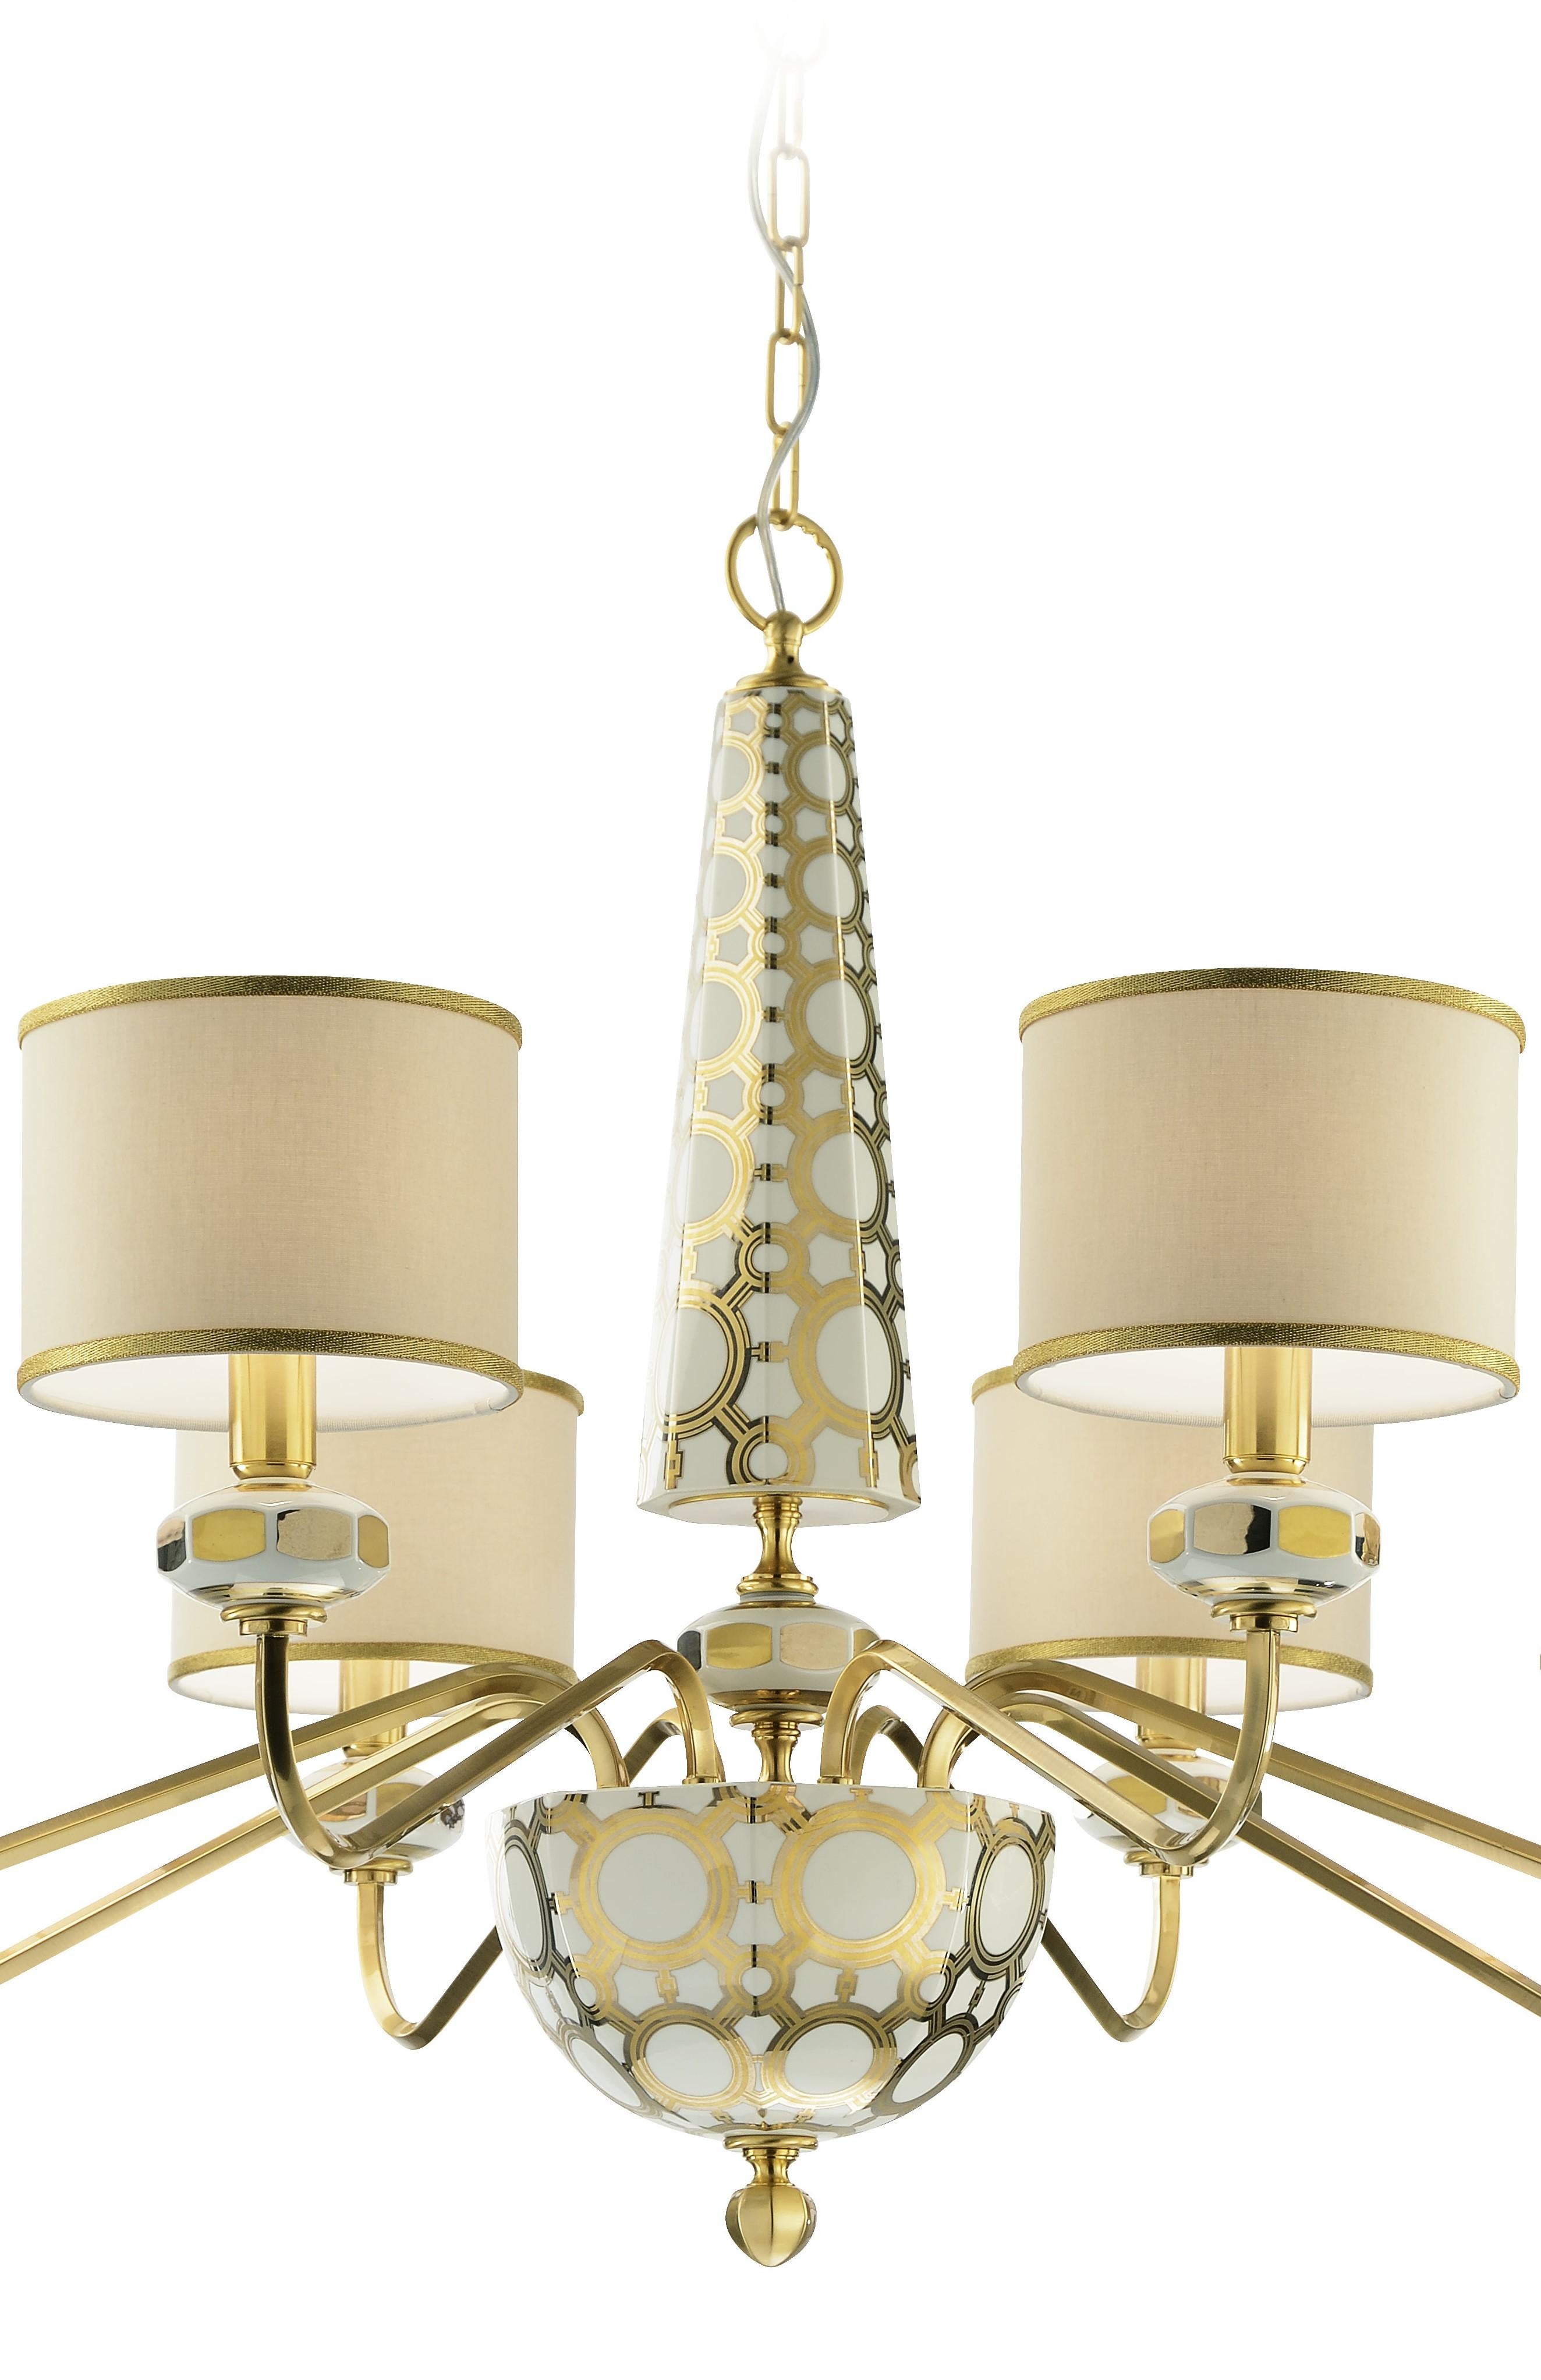 Contemporary Palazzo Vecchio Collection, 8 Lights Chandelier, Gold and Platinum Decorations For Sale